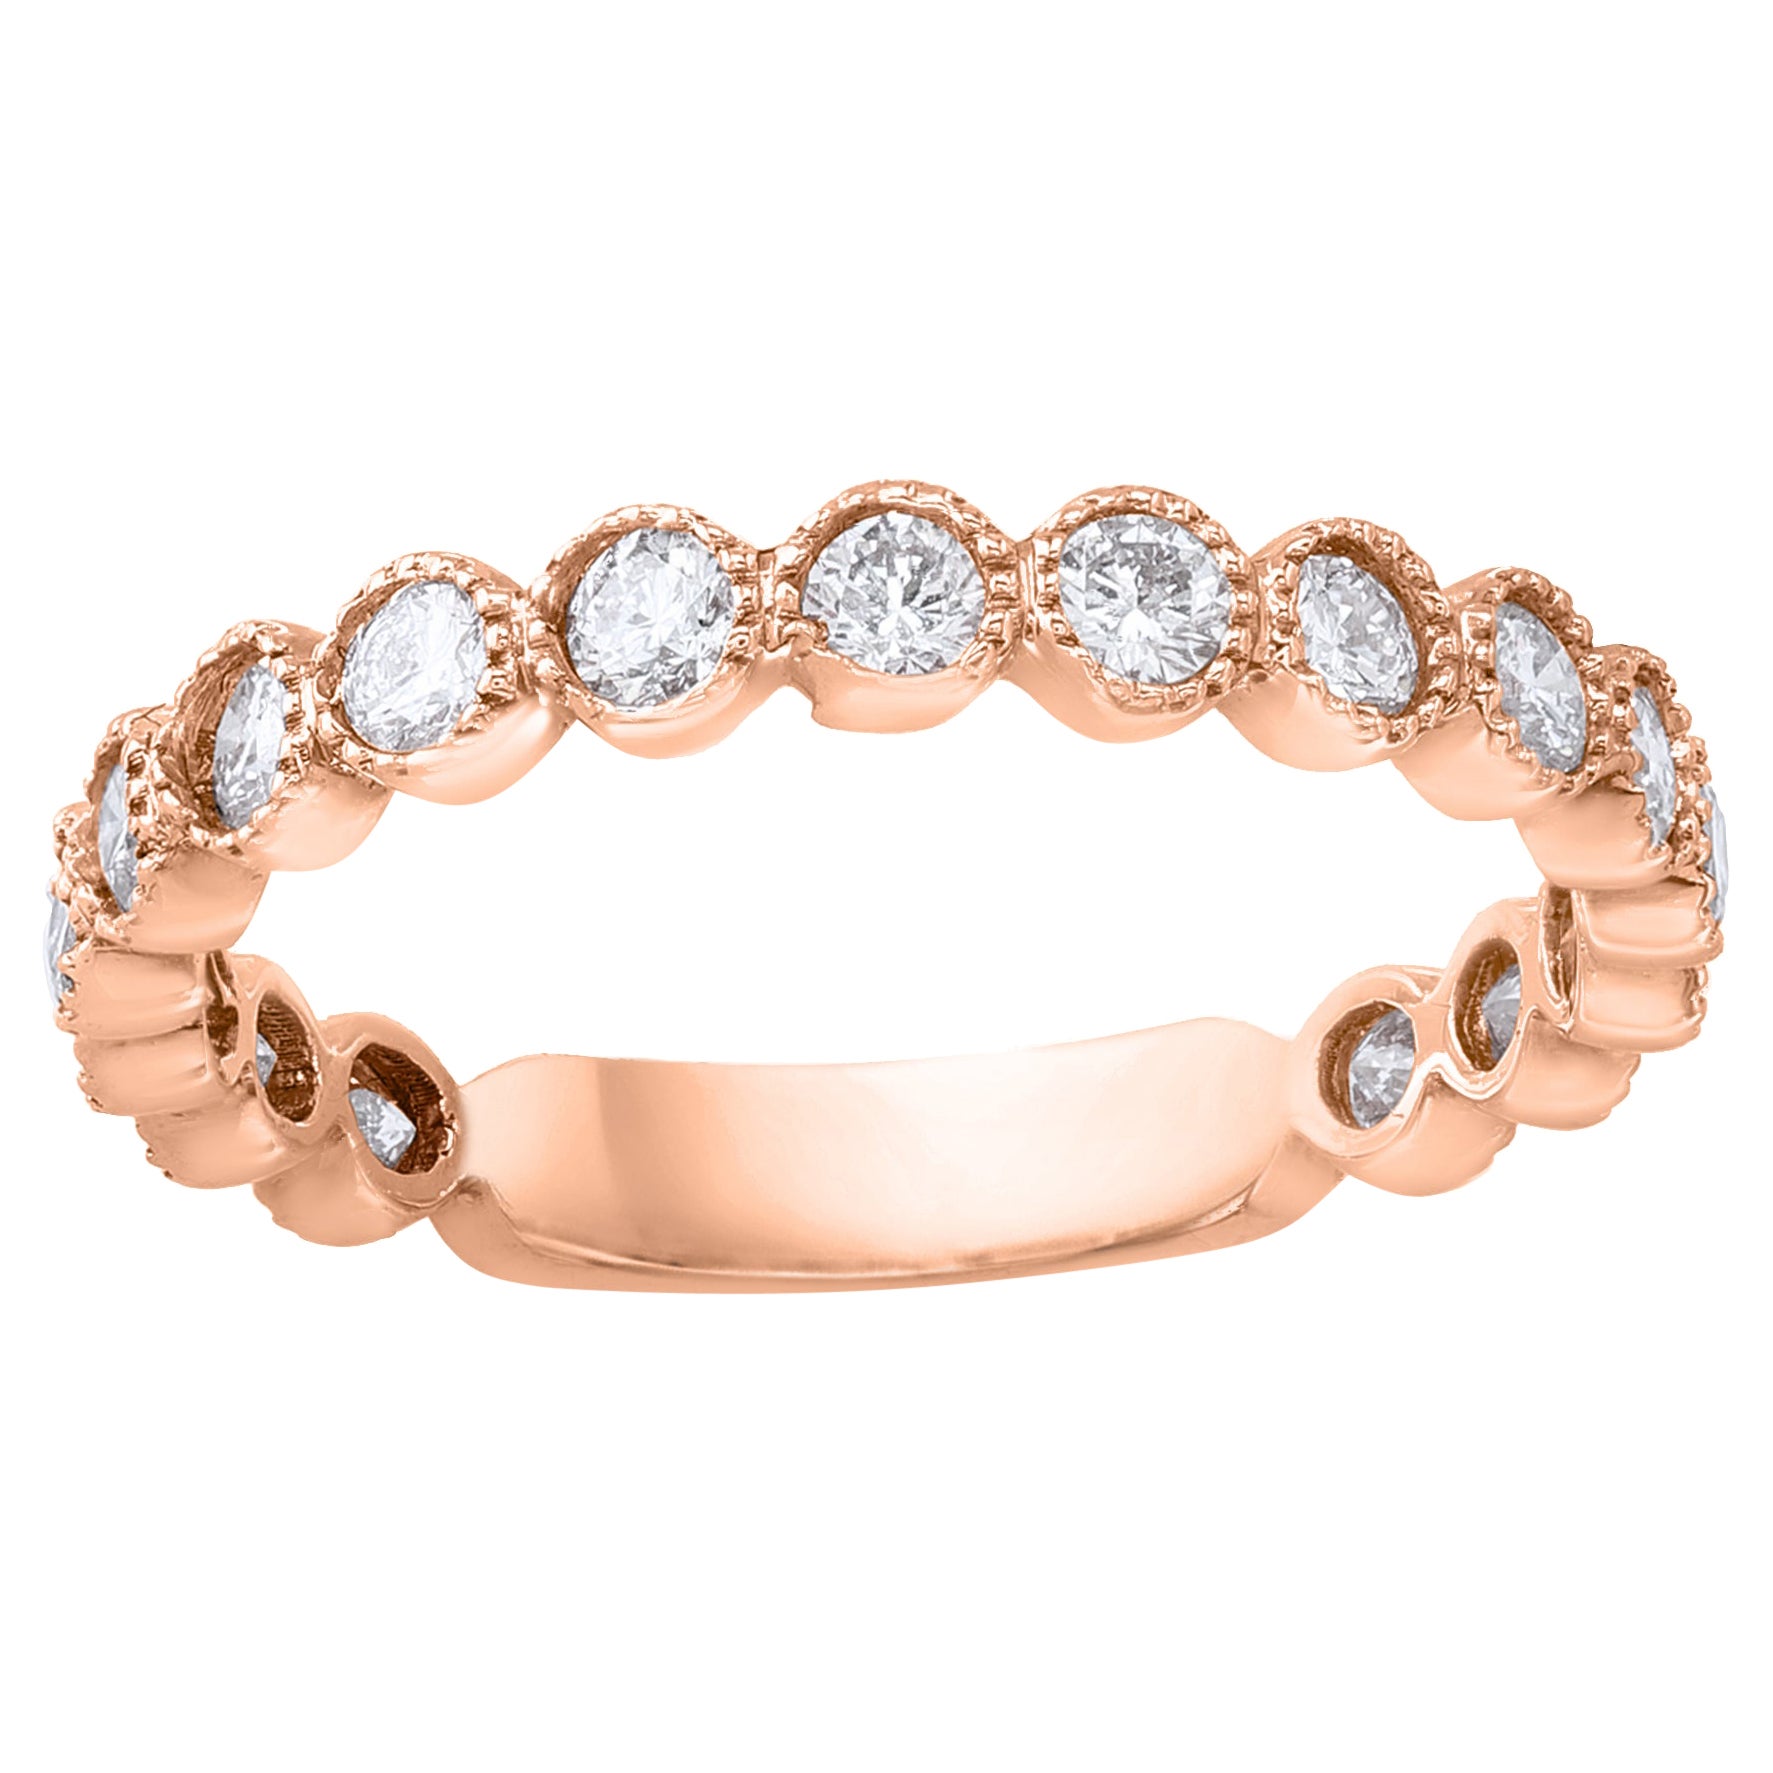 1.02 Carat Round Diamond Wedding Band in 14K Rose Gold For Sale